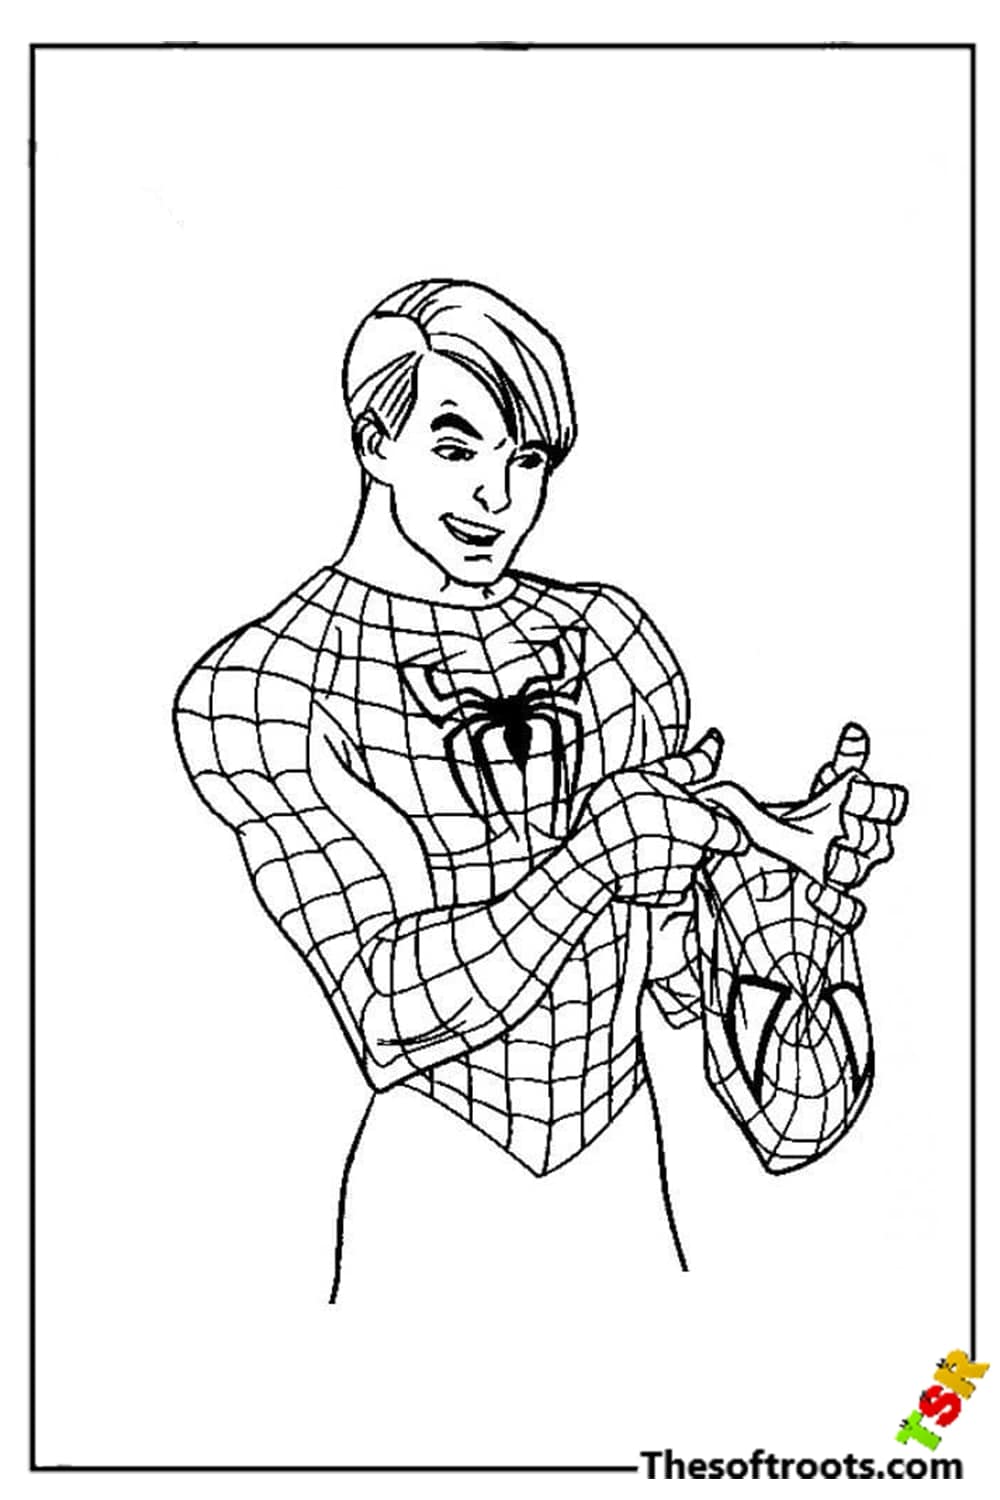 Peter the Spiderman coloring pages